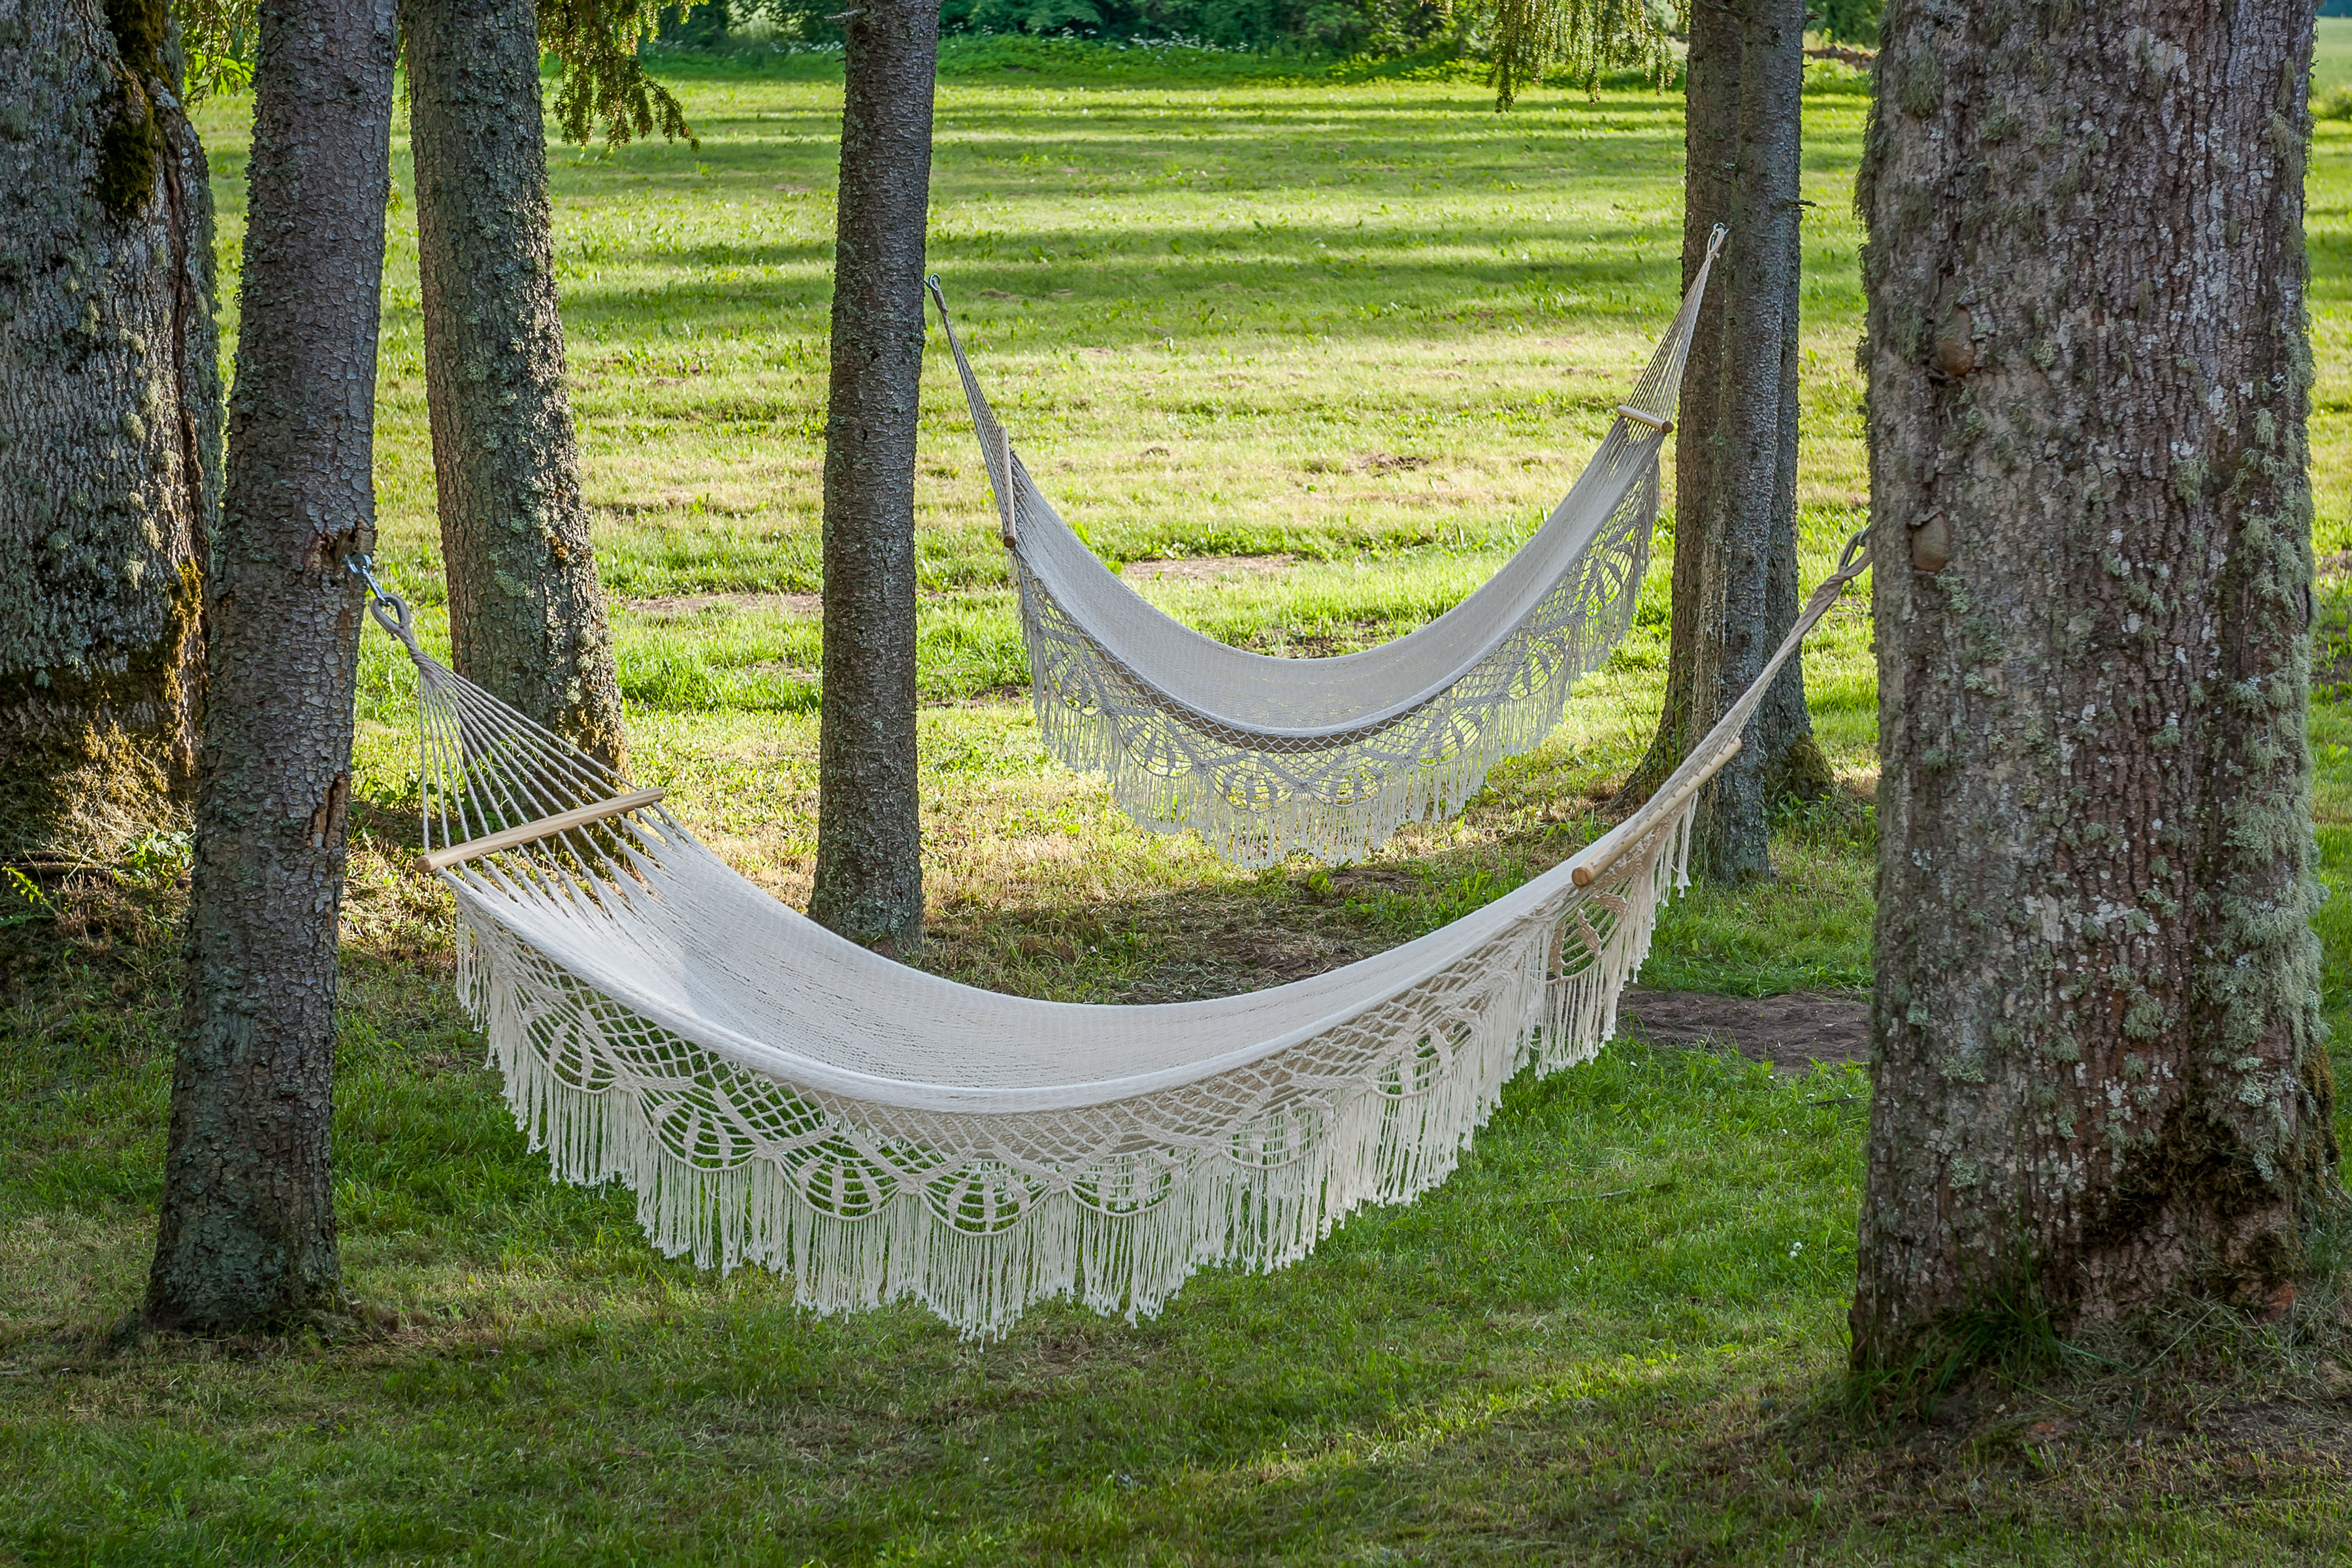 Two hammocks hung between trees in a large backyard.